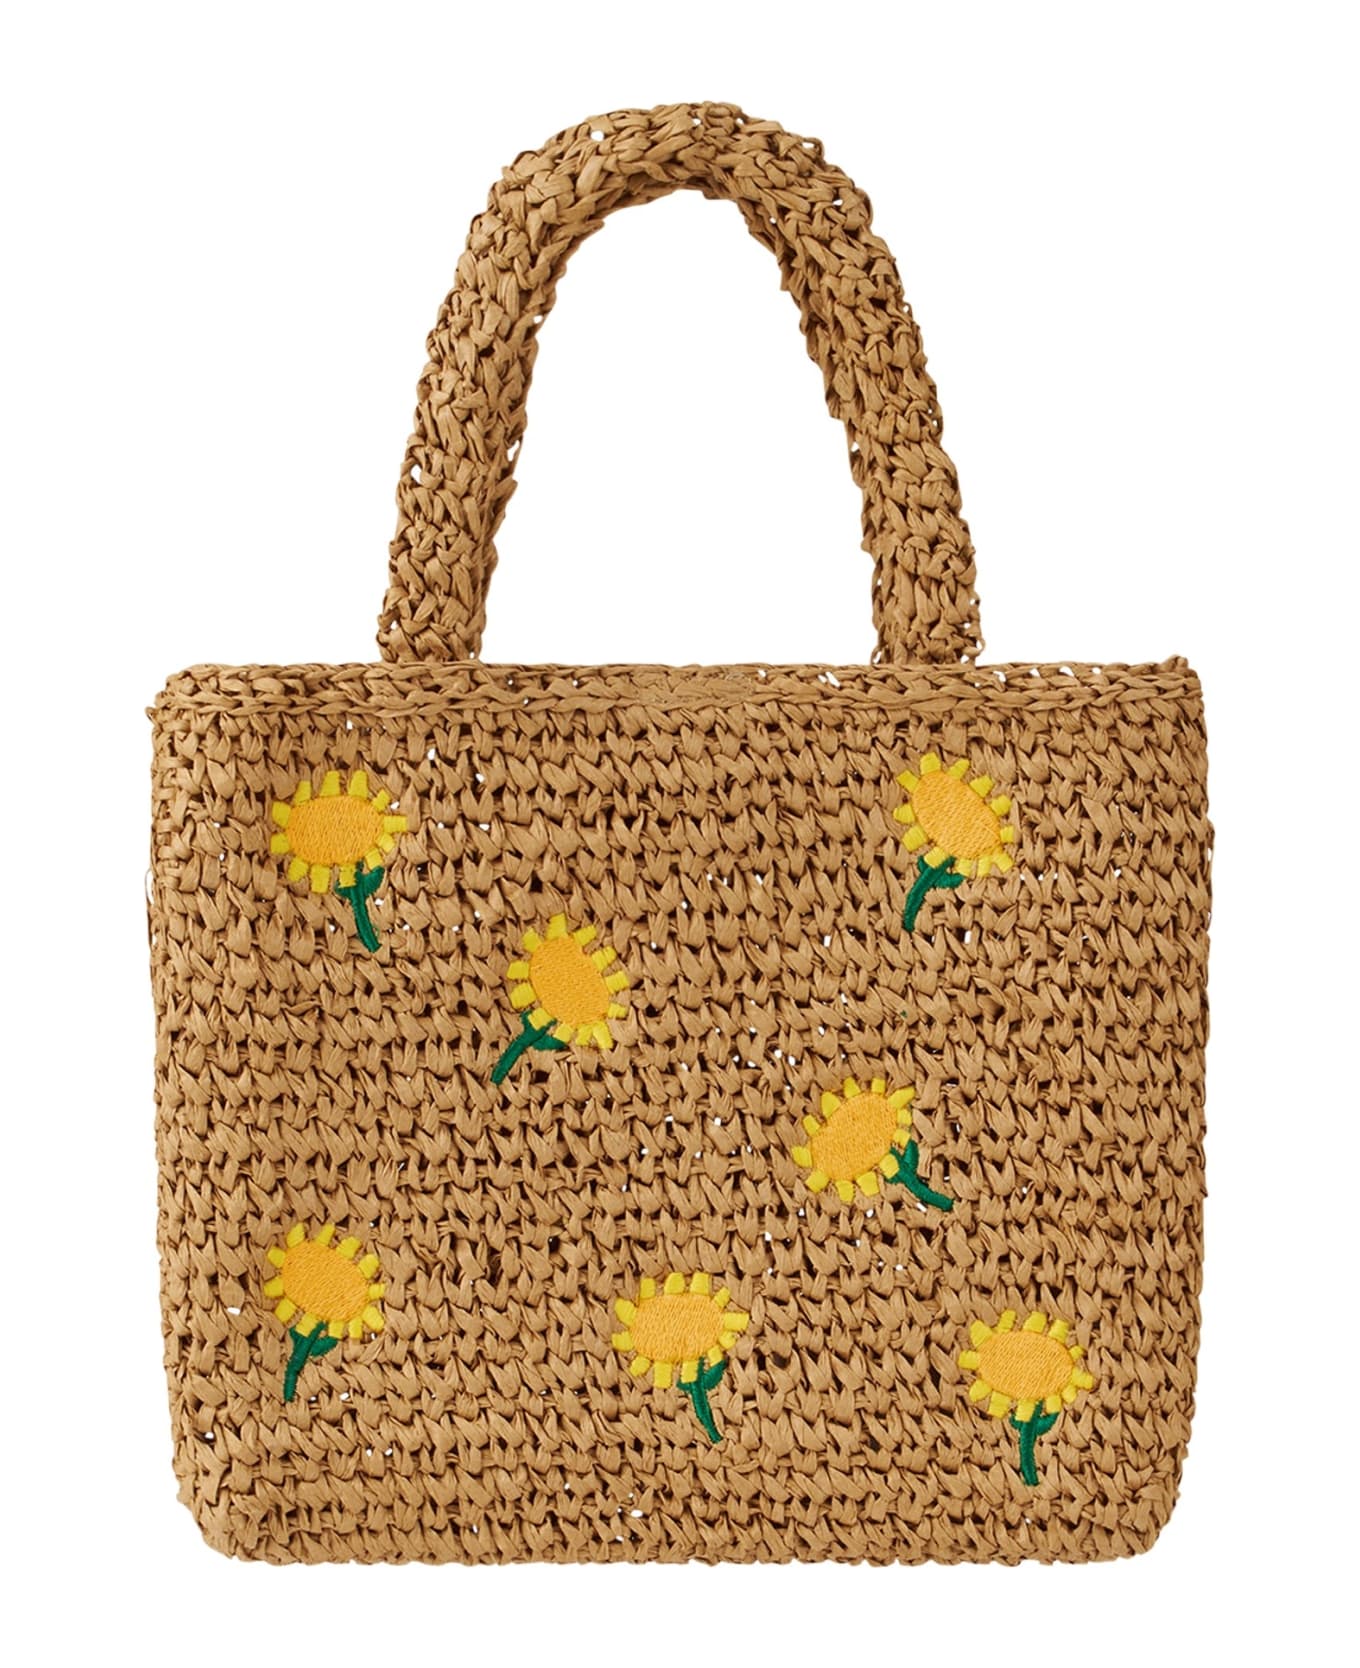 Stella McCartney Kids Tote Bag With Floral Embroidery - Brown アクセサリー＆ギフト